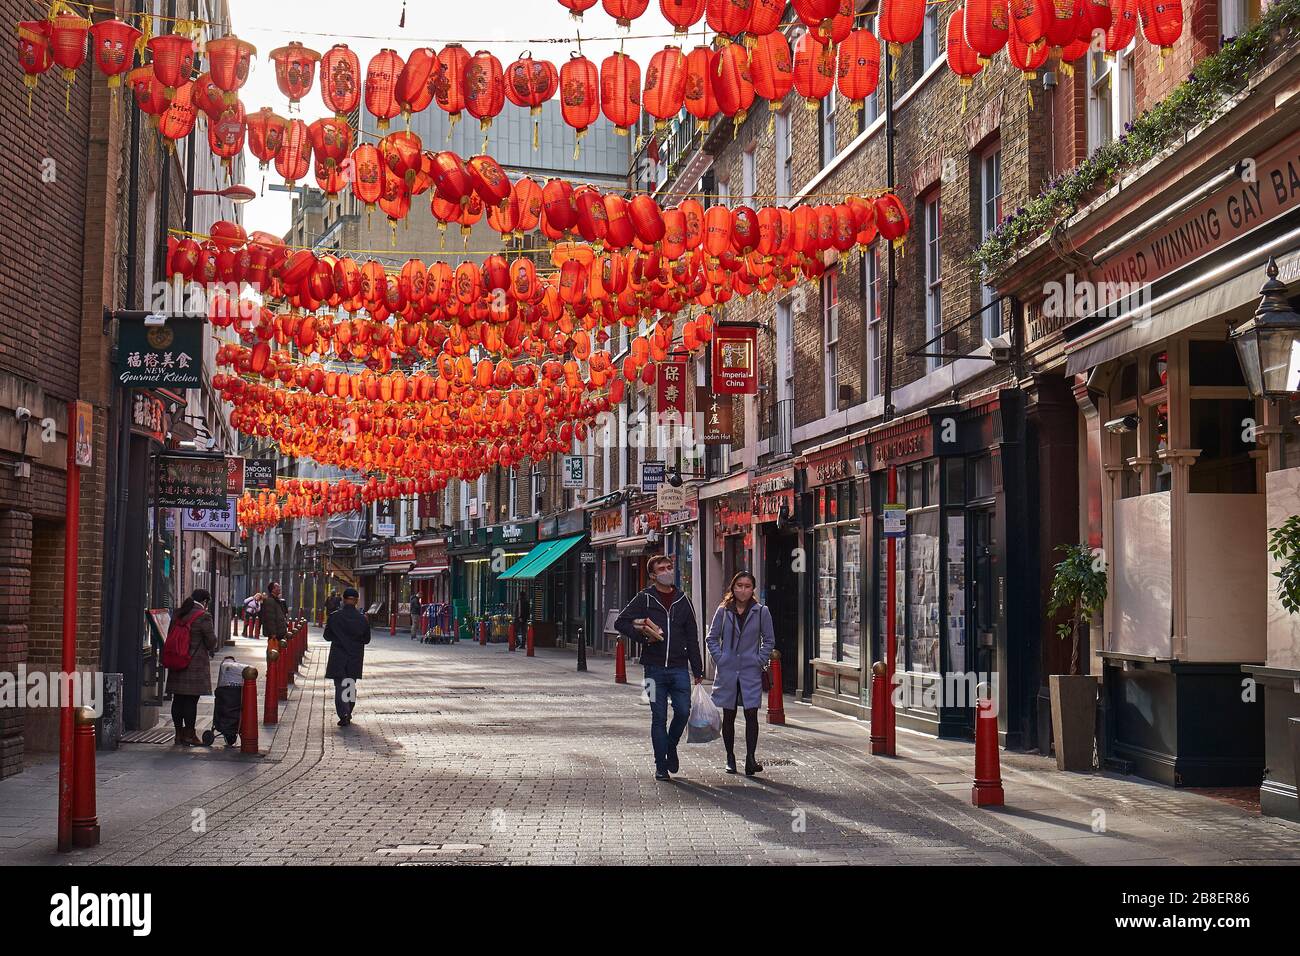 March 21st, 2020-Soho, London, England: Two people wear face masks in a deserted Chinatown during the Coronavirus pandemic Stock Photo